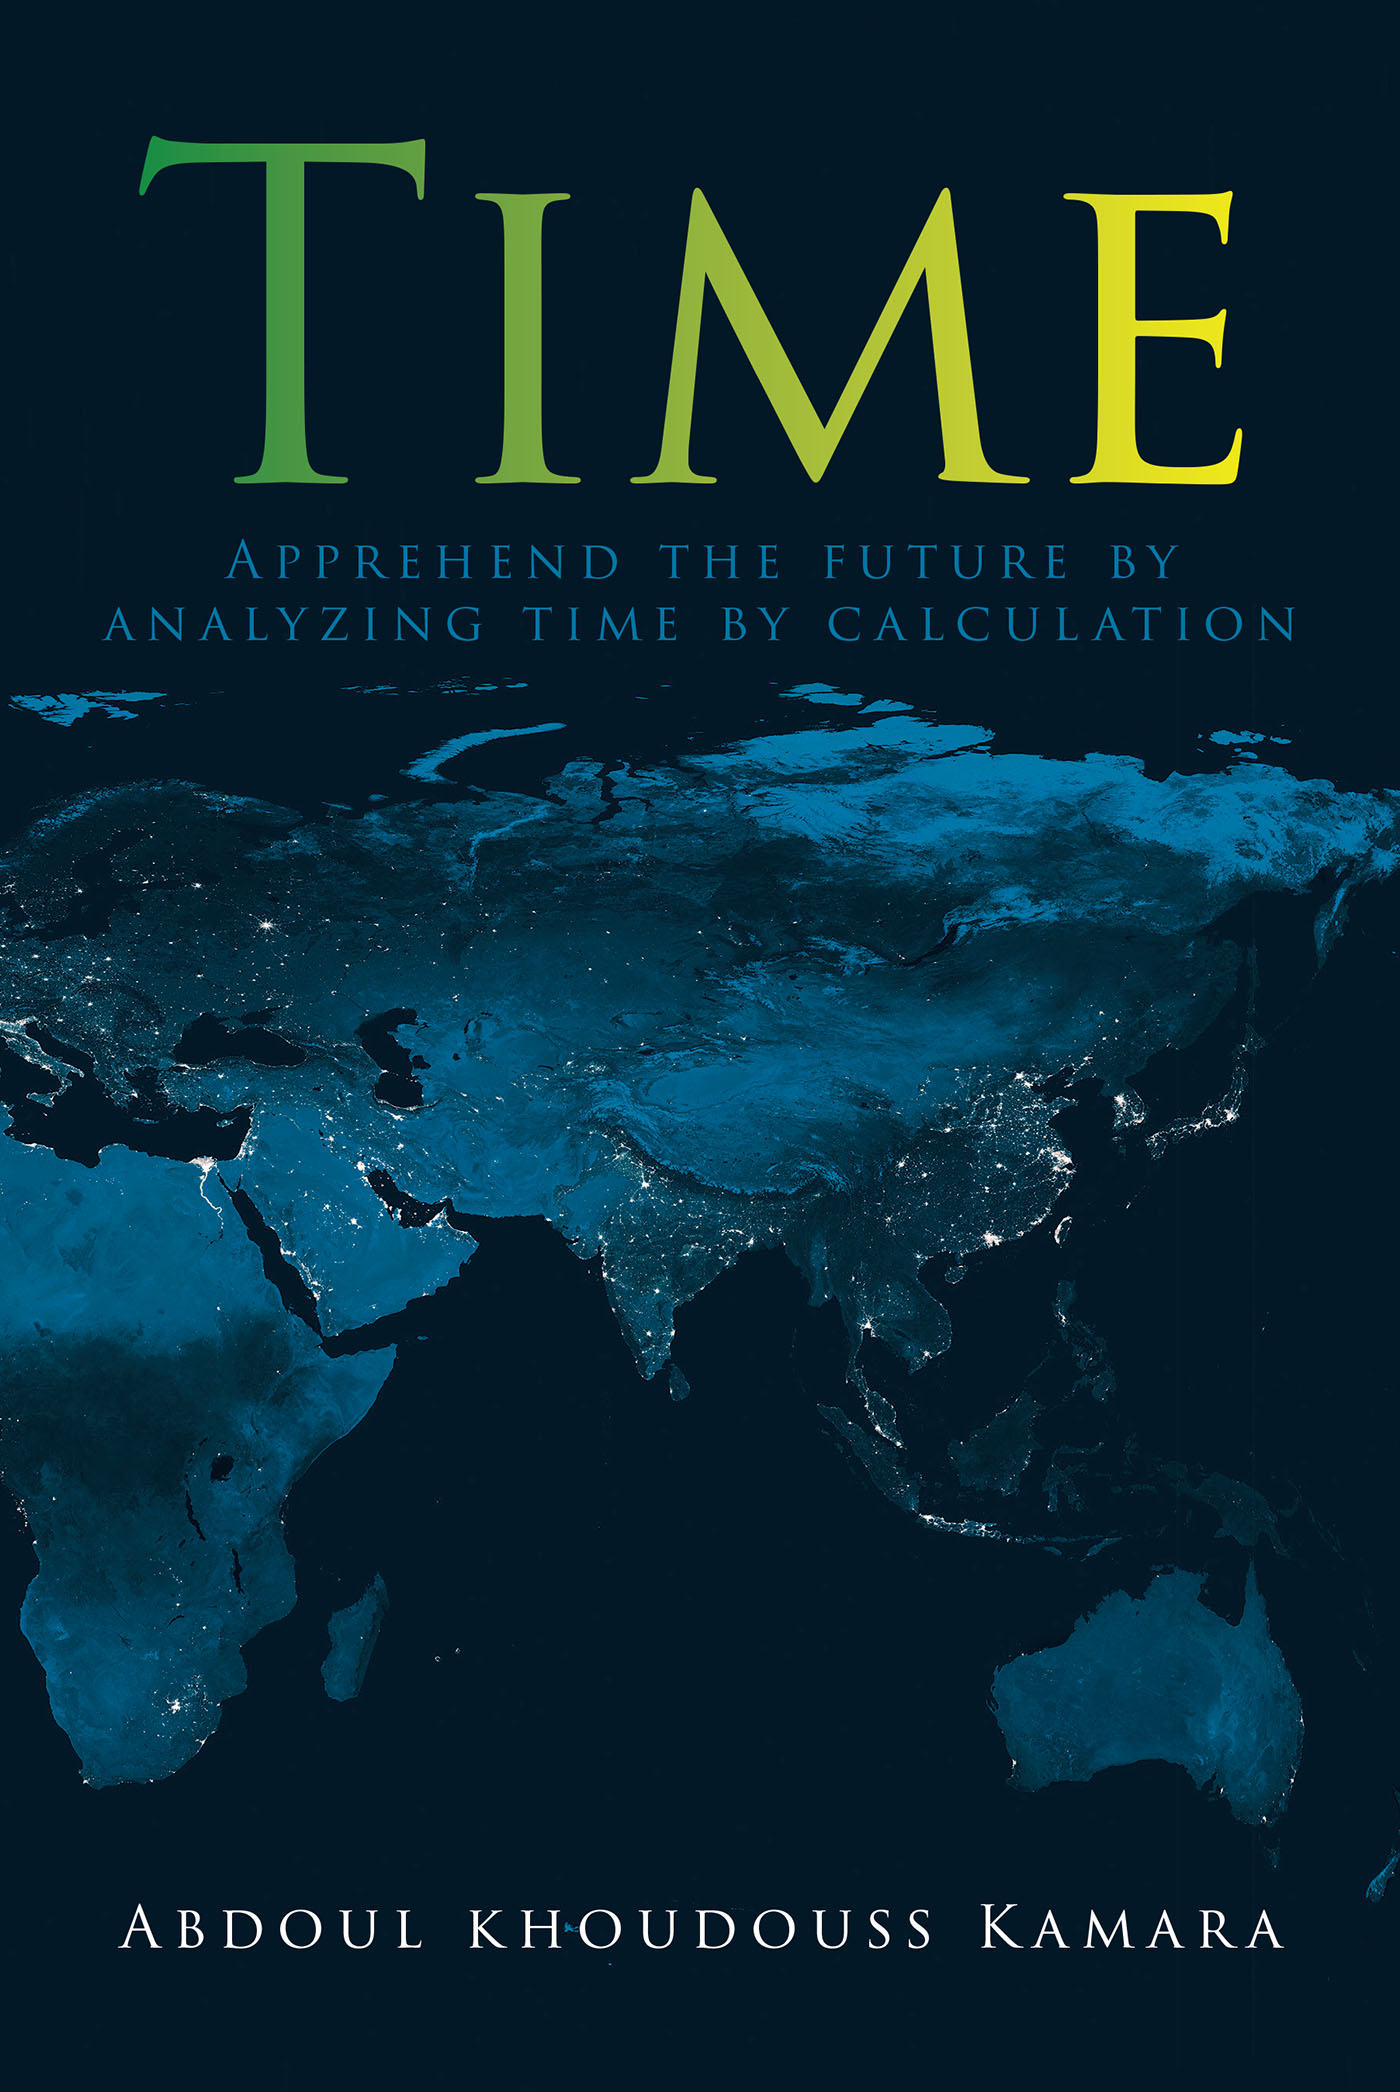 Abdoul Khoudouss Kamara’s Newly Released “Time: Apprehend the future by analyzing time by calculation” is a Thought-Provoking Study of Time